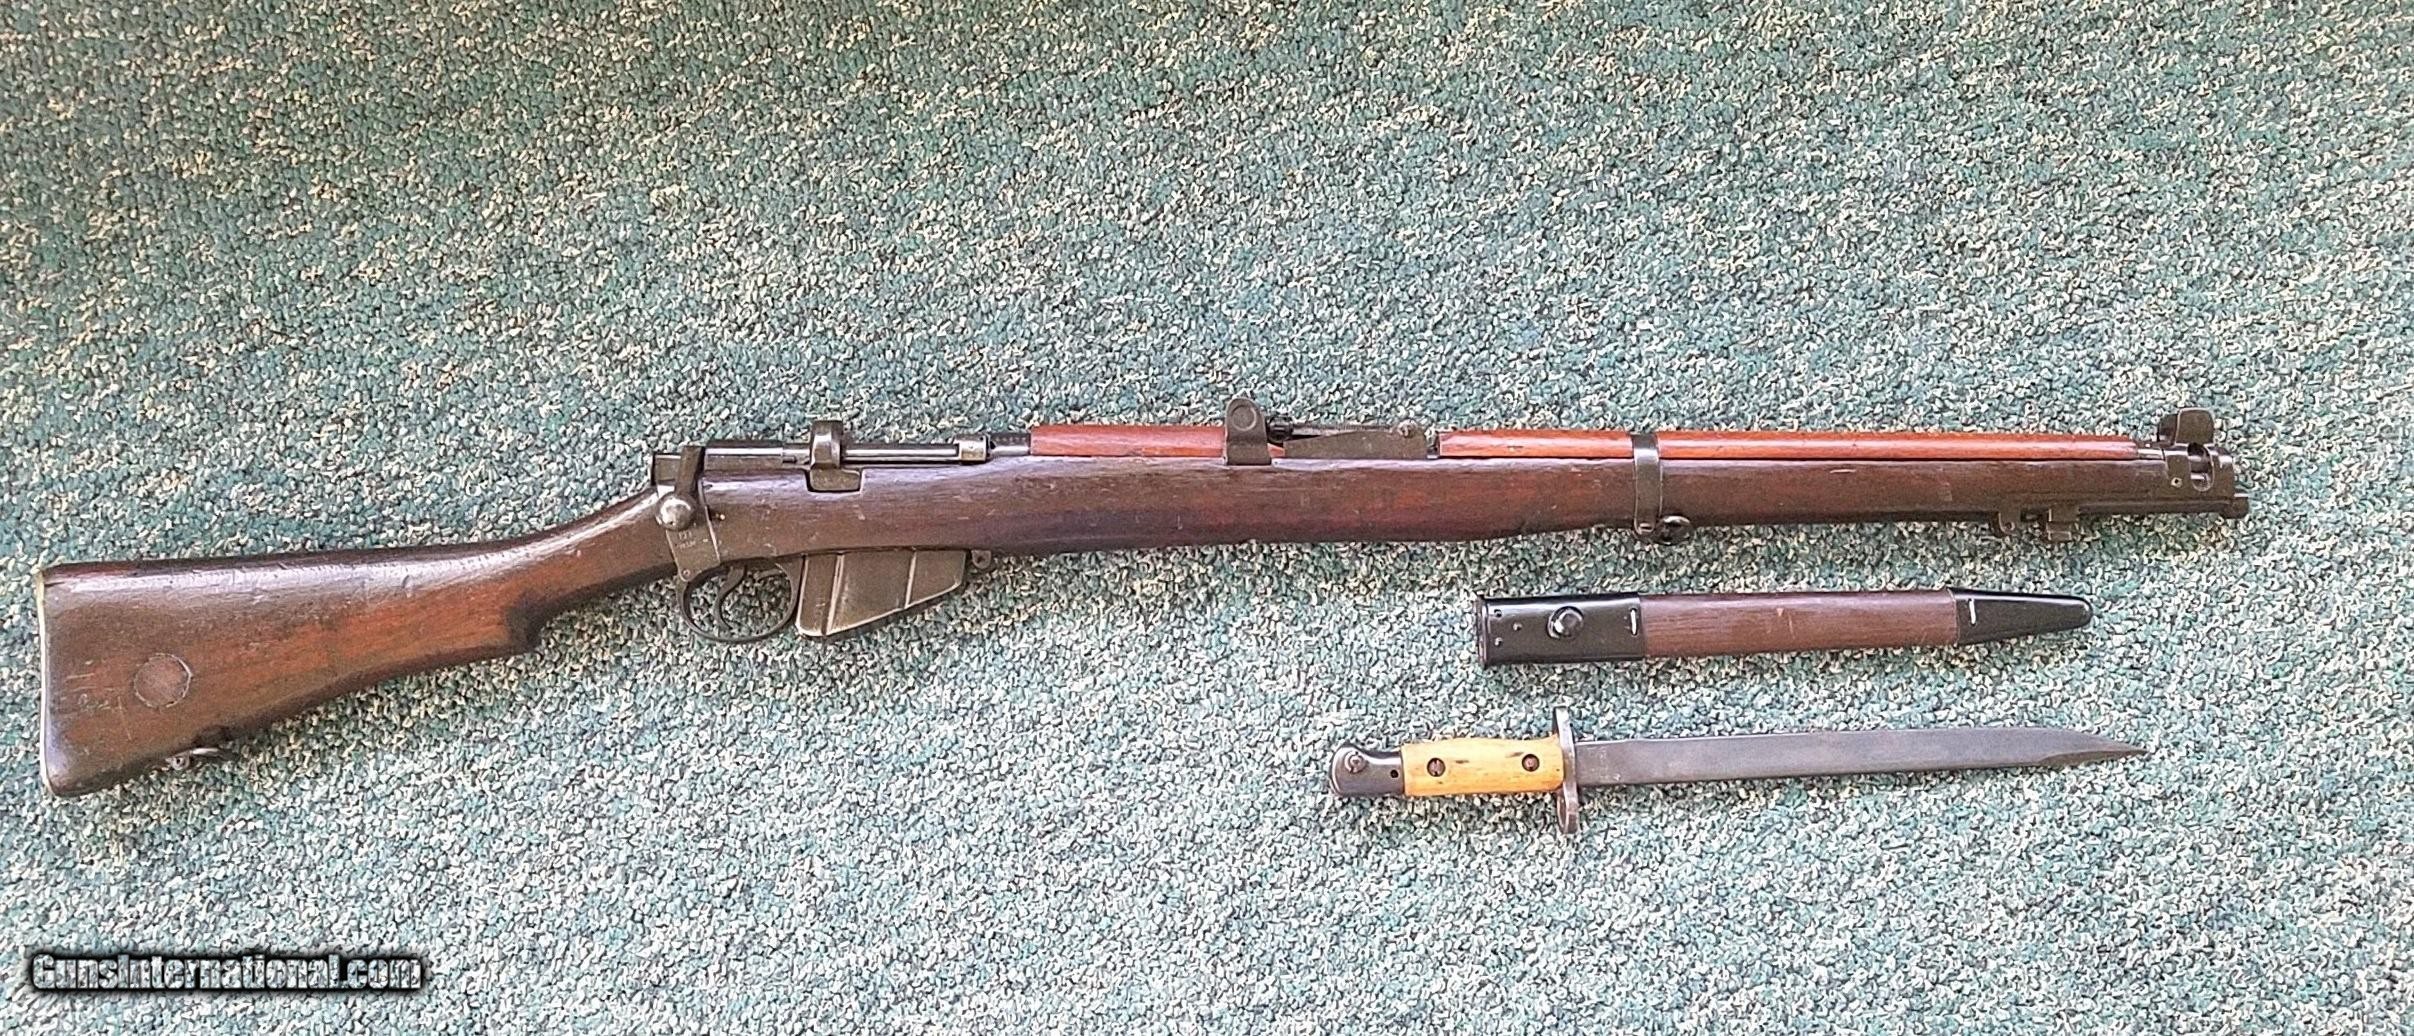 British - Ishapore Produced - 303 Enfield Number 1 - Mark 3 Rifle